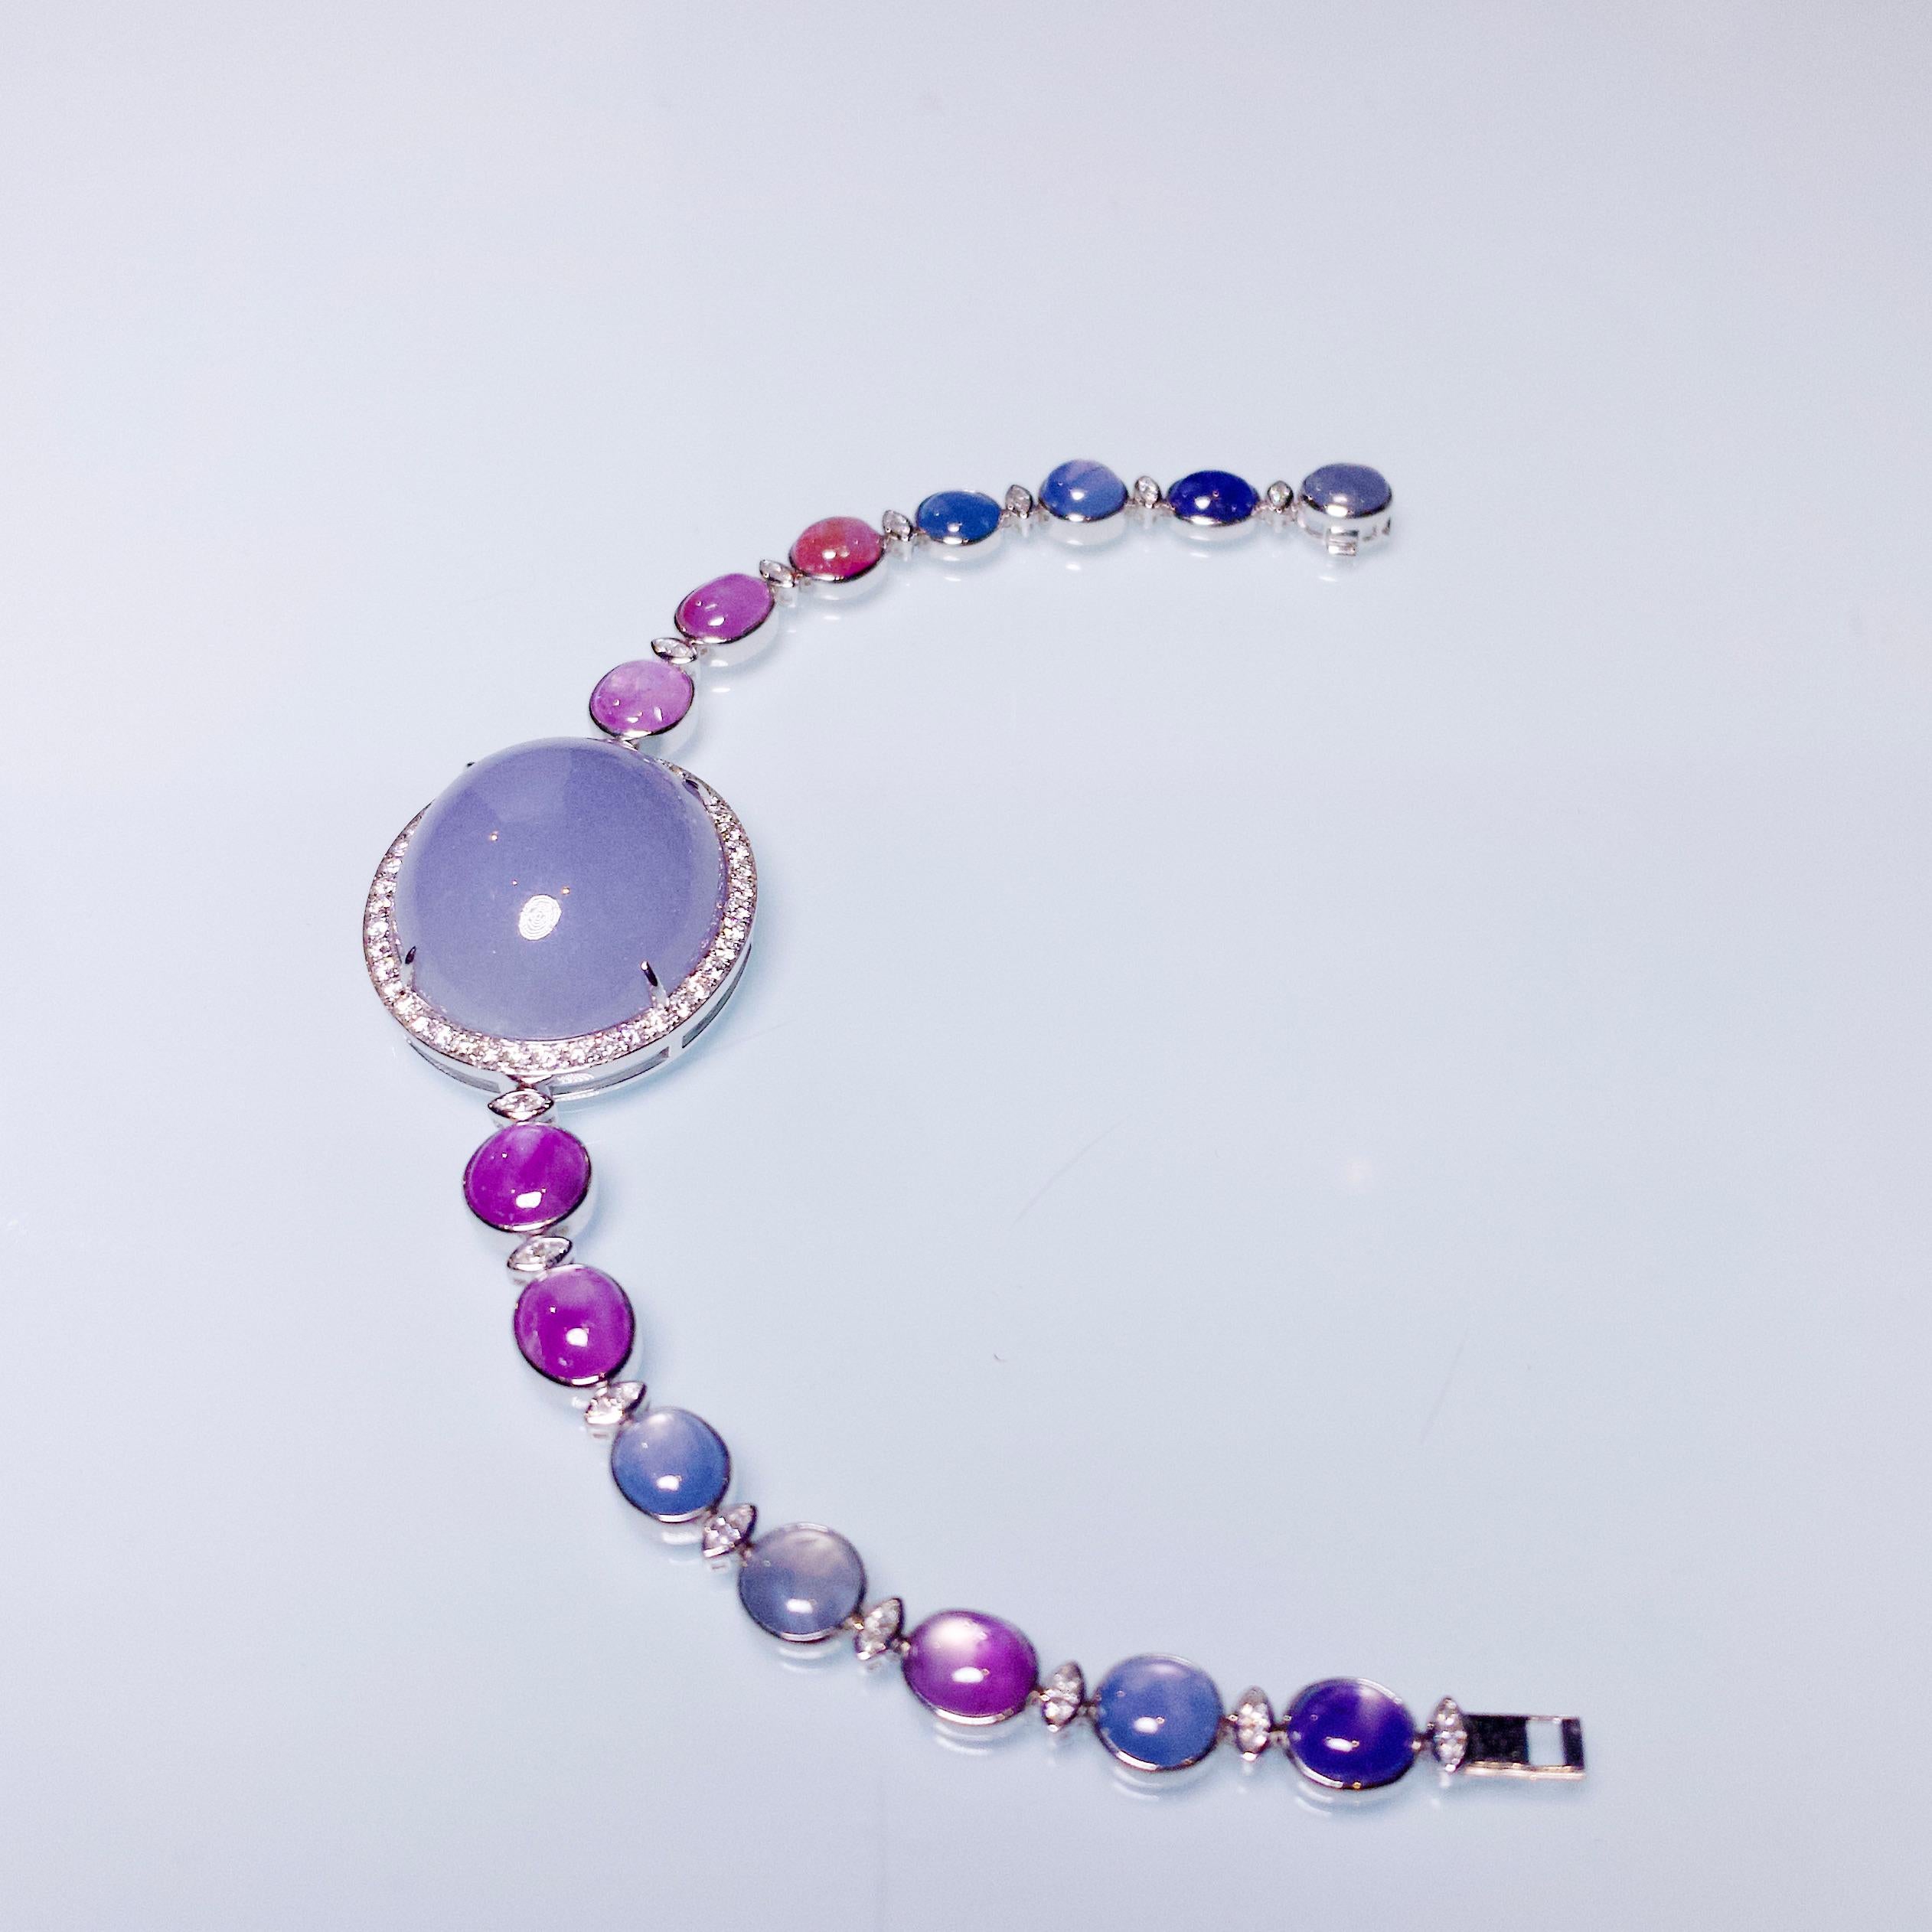 This is a watch like bracelet, with a massive Type A Lavender Jadeite Cabochon set in the middle of the bracelet. The Jadeite is then surrounded by diamond and the wrist band is made of 18K White gold with Star Sapphire and Diamonds. The star